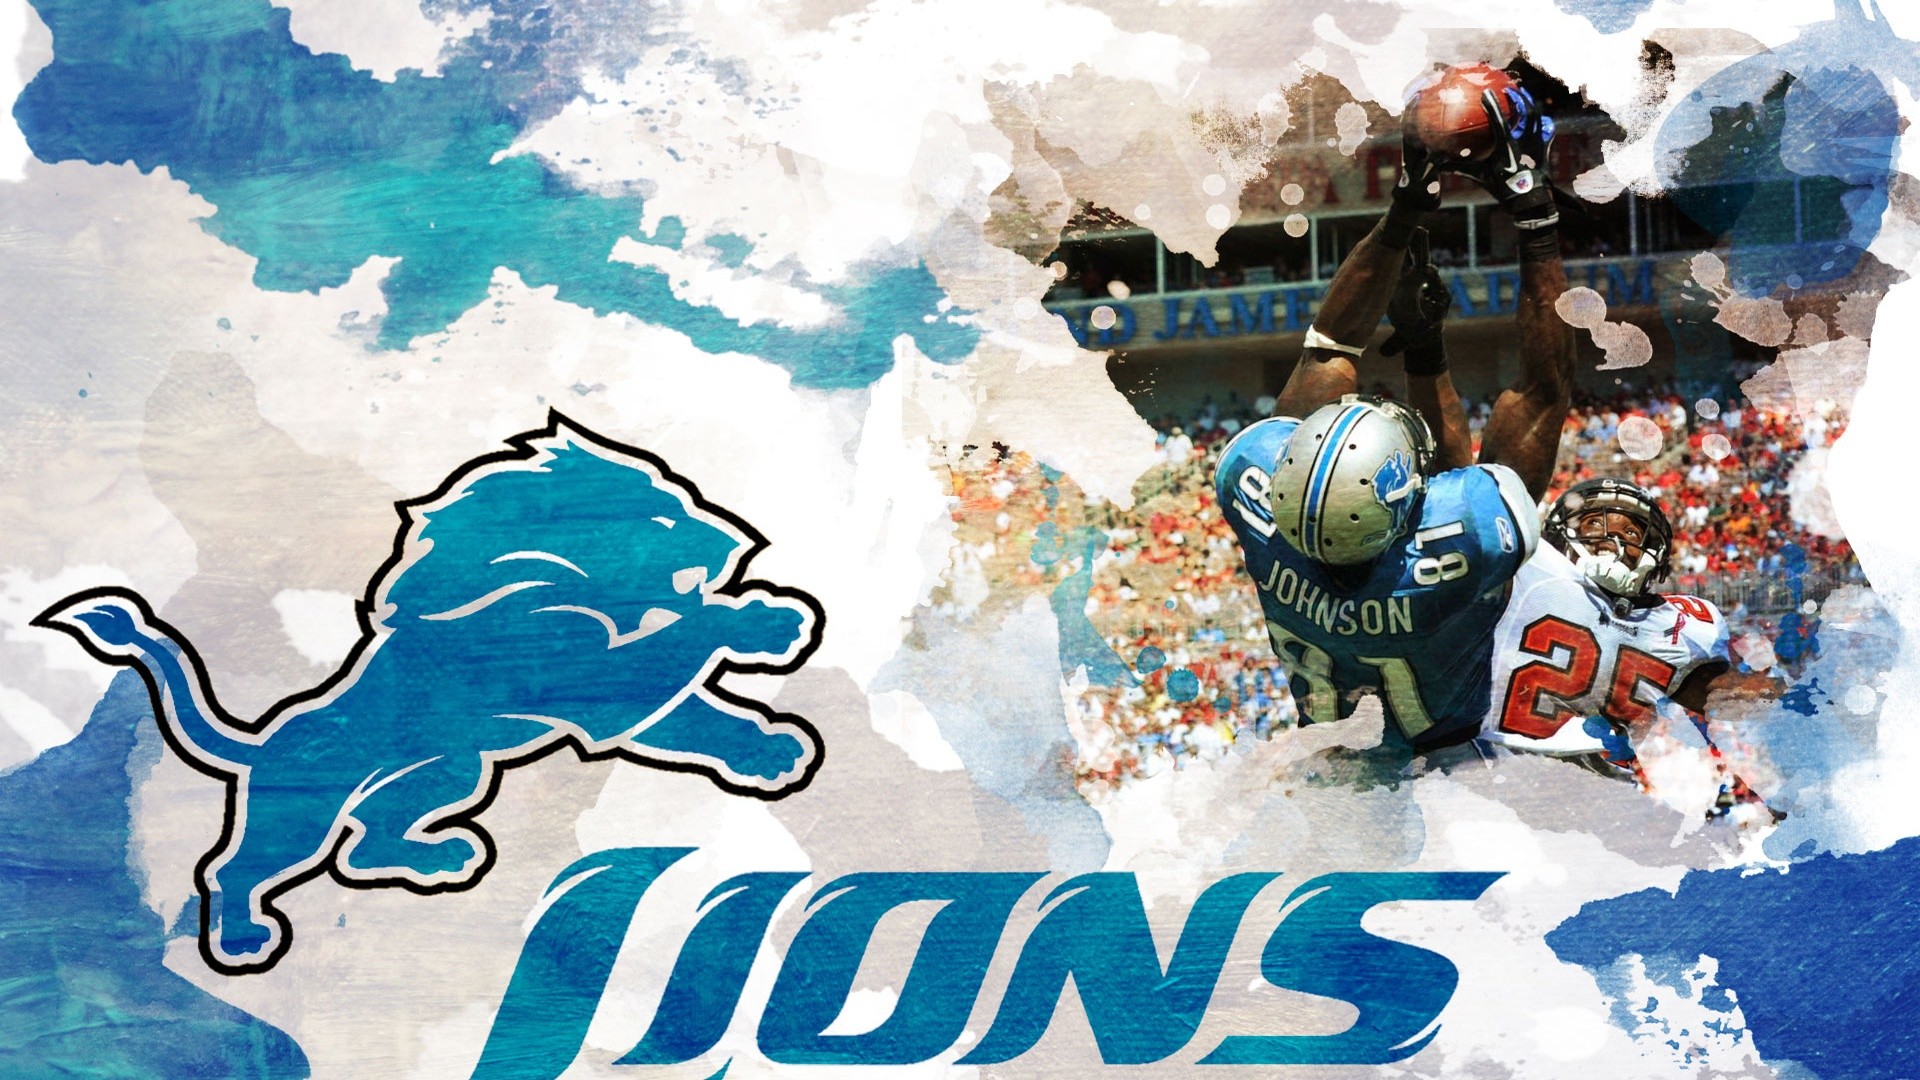 1920x1080 awesome detroit lions wallpapers - photo #4. A Time Traveler Evades the Law  Again and Again in Scifi